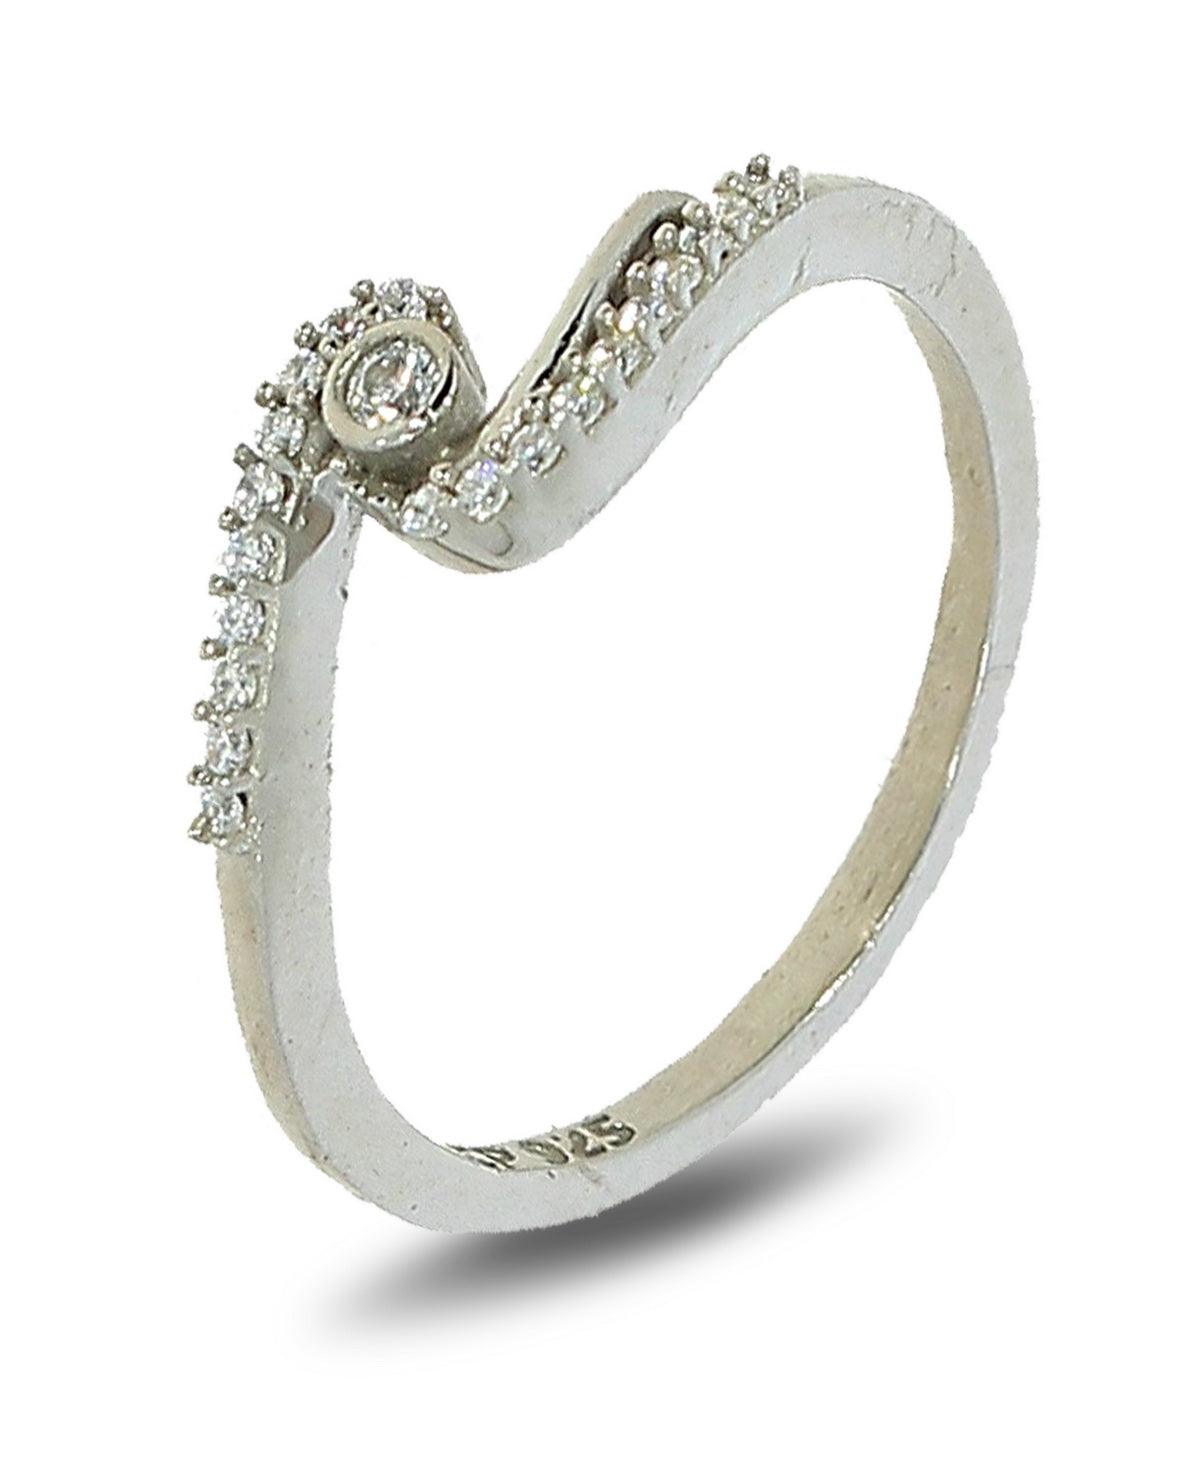 Sterling Silver Solitaire Ring - Chandrani Pearls